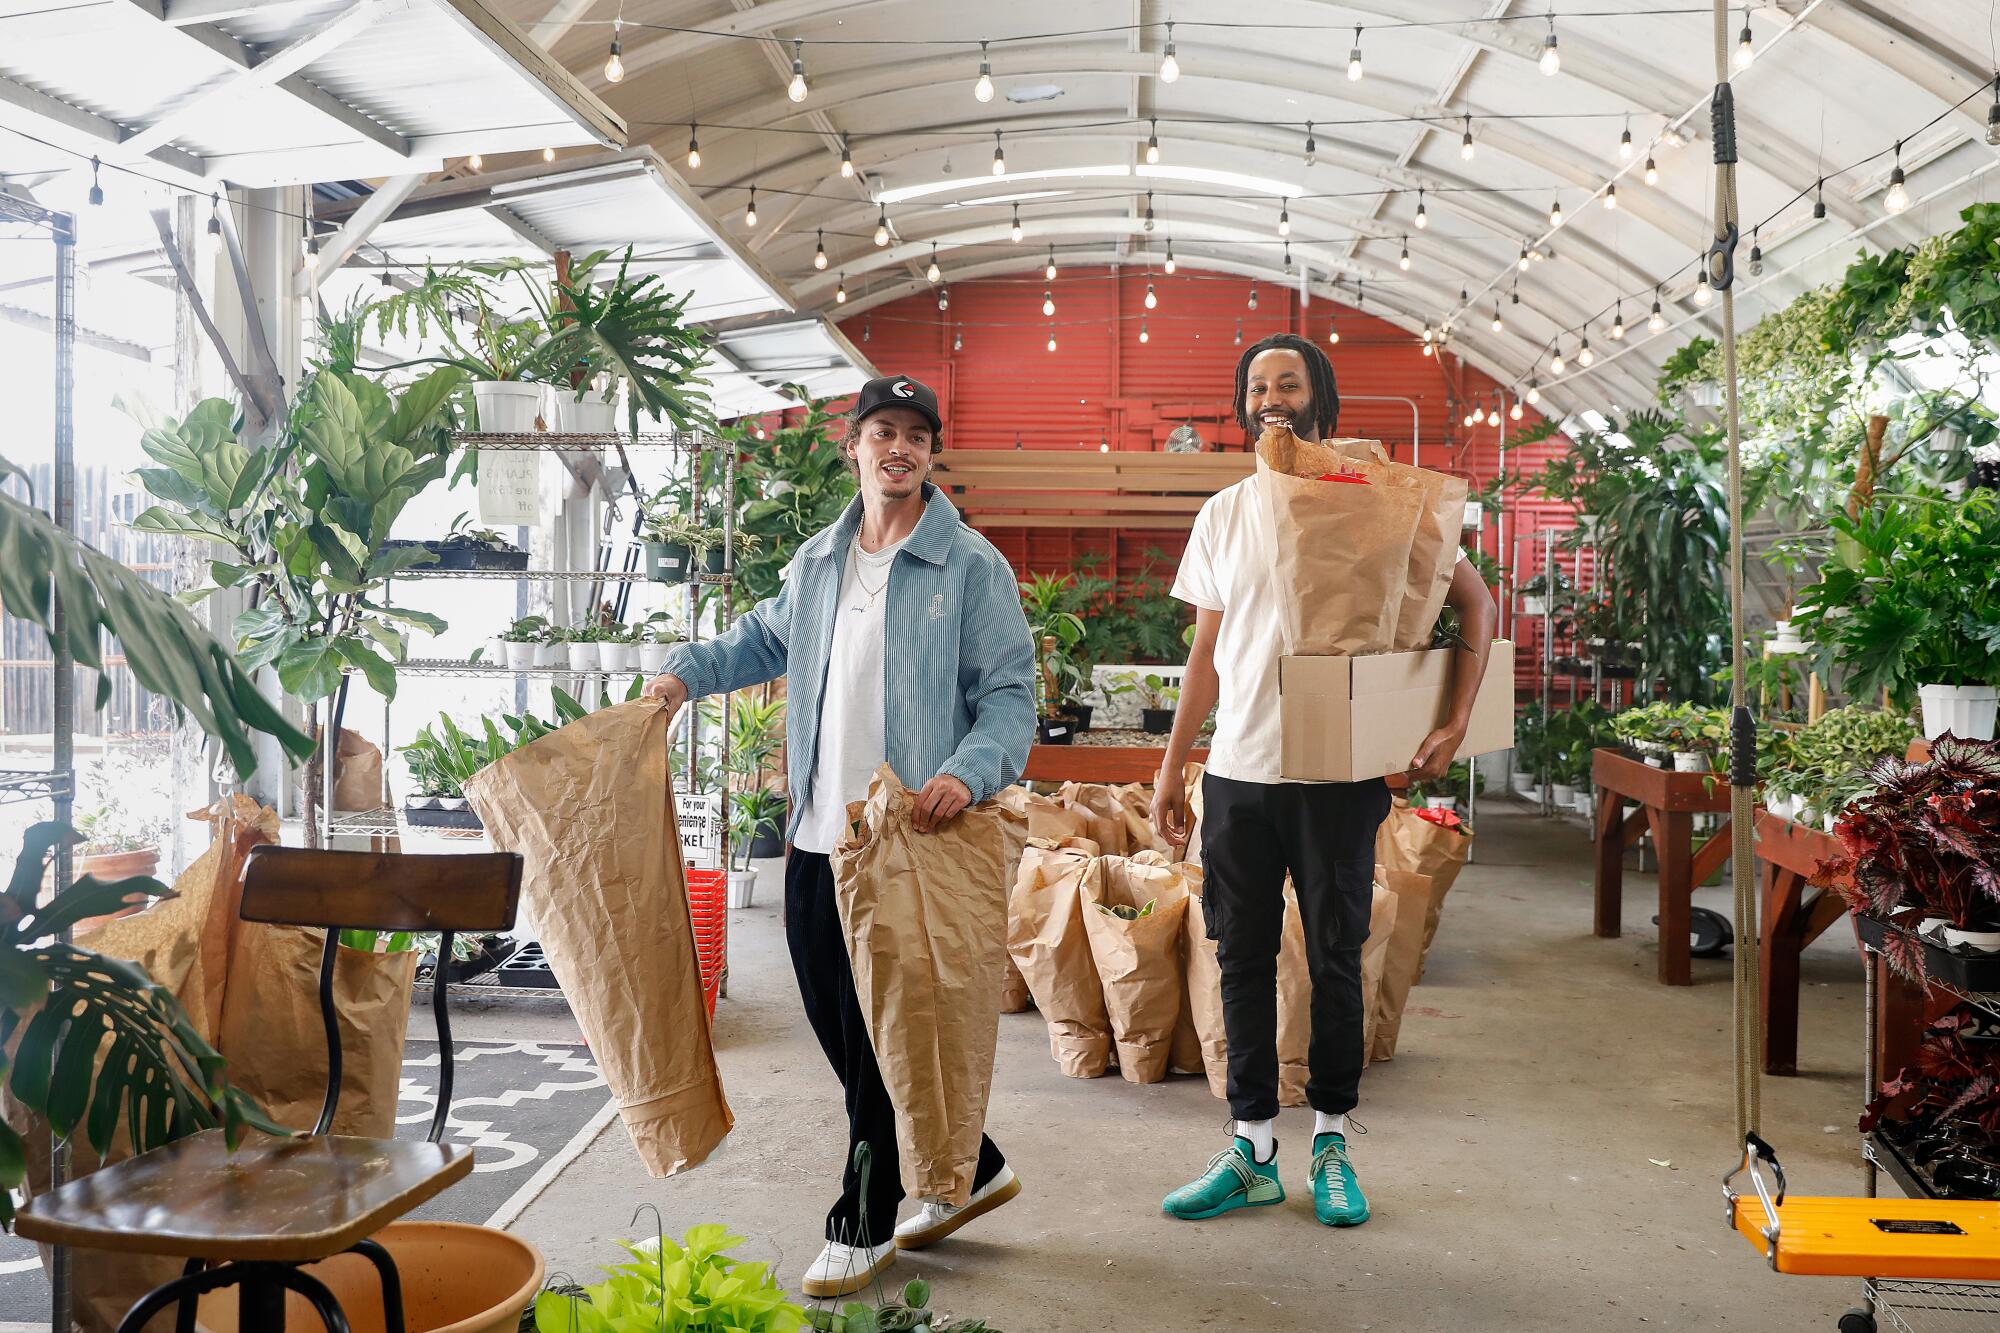 Two people carry plants wrapped in brown paper out of a greenhouse-like plant shop.